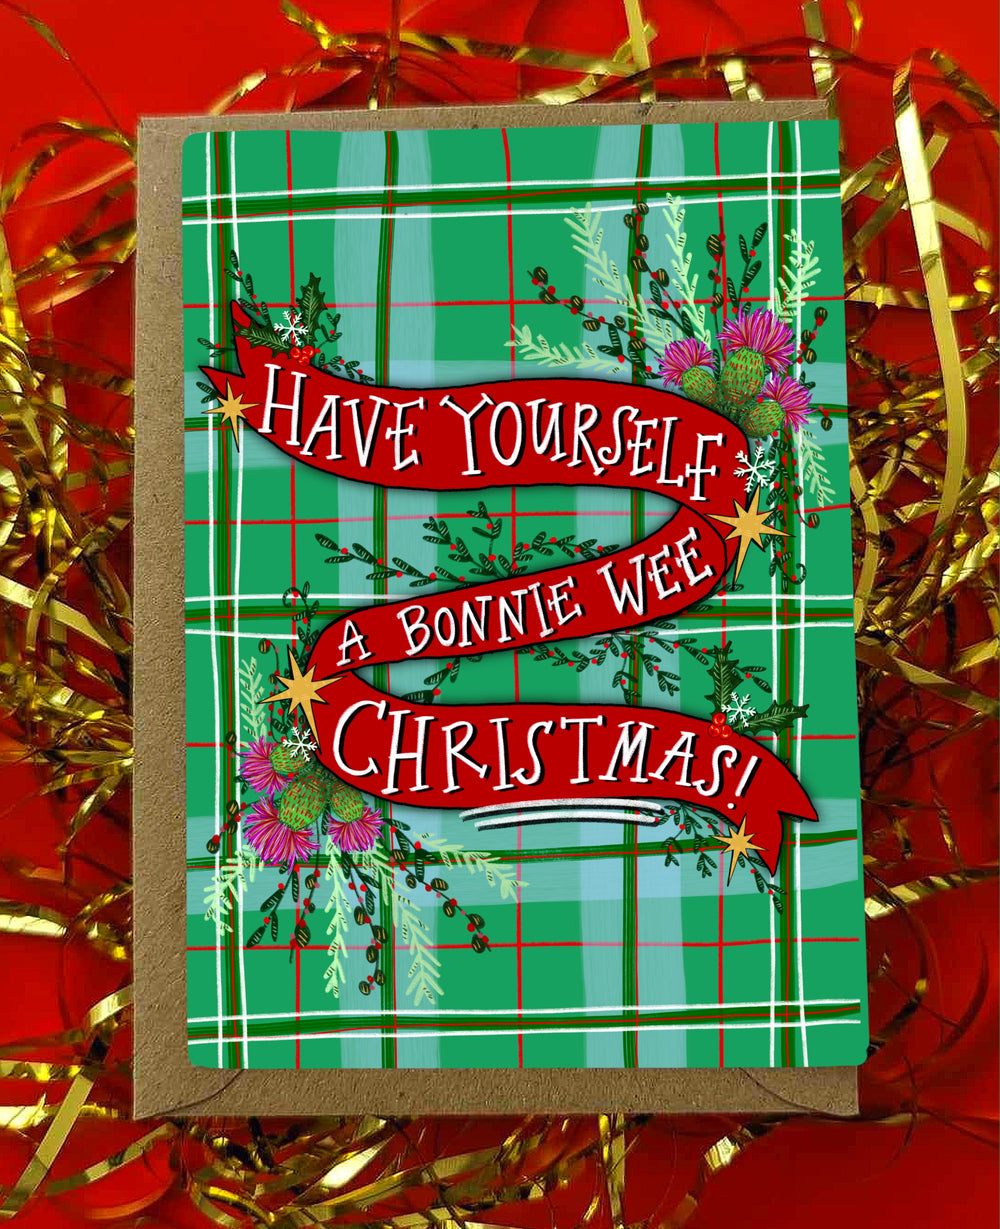 Have yersel’ a Bonnie wee Christmas! Xmas Card